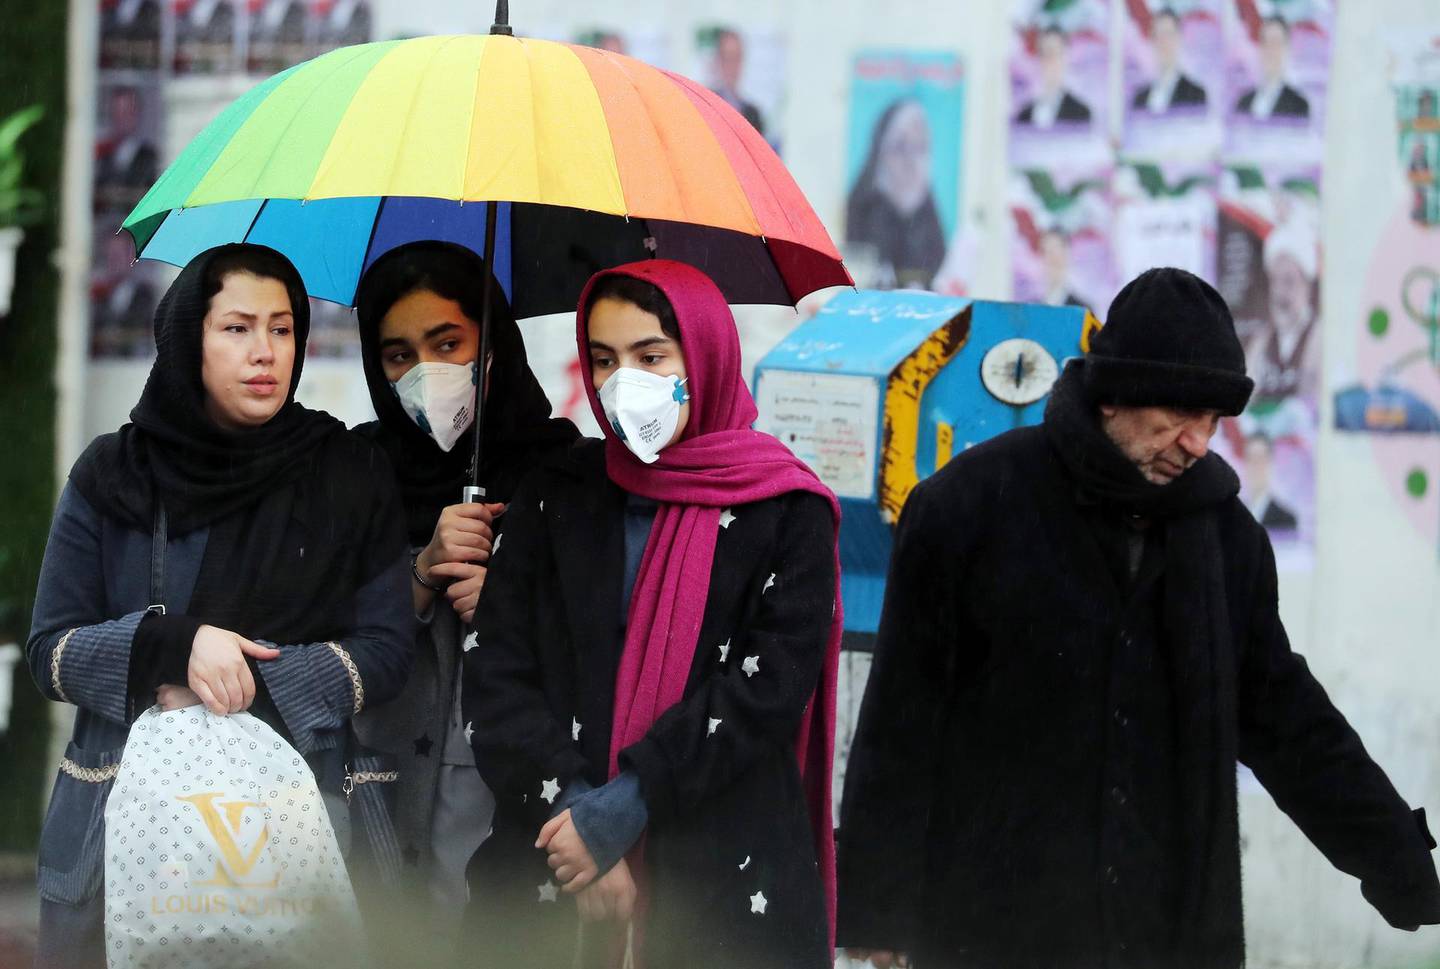 epa08230871 Iranian women wearing masks wait for a taxi in a street of Tehran, Iran, 20 February 2020. According to the Ministry of Health, two people diagnosed with coronavirus died in the city of Qom, central Iran. The disease caused by the virus (SARS-CoV-2) has been officially named COVID-19 by the World Health Organization (WHO).  EPA/ABEDIN TAHERKENAREH